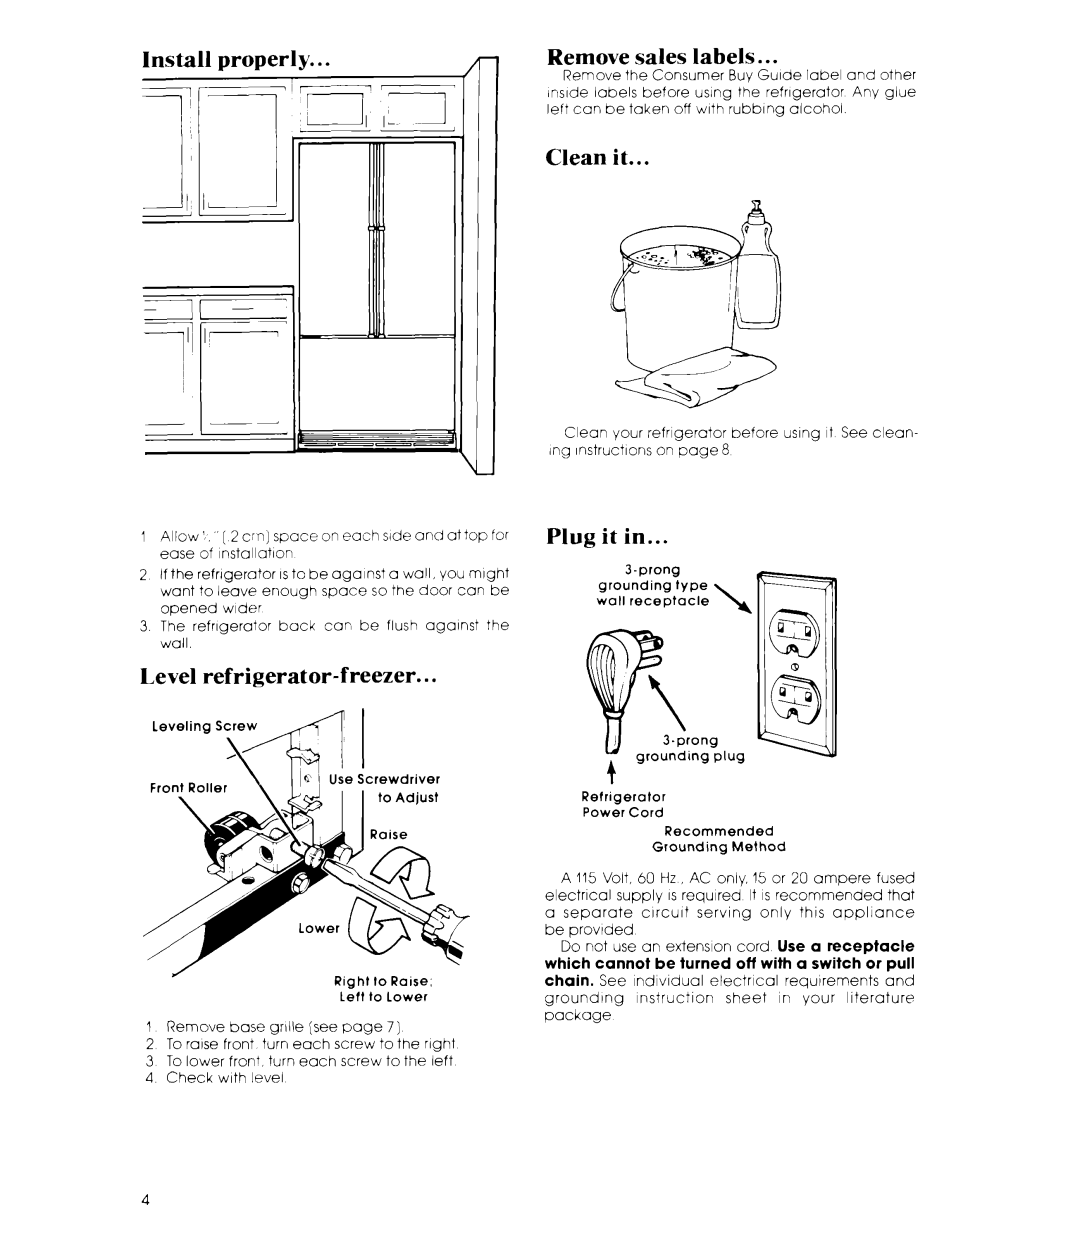 Whirlpool EB19MK manual Install, properly, Remove, labels, Clean it, Level refrigerator-freezer, Plug it in, sales 